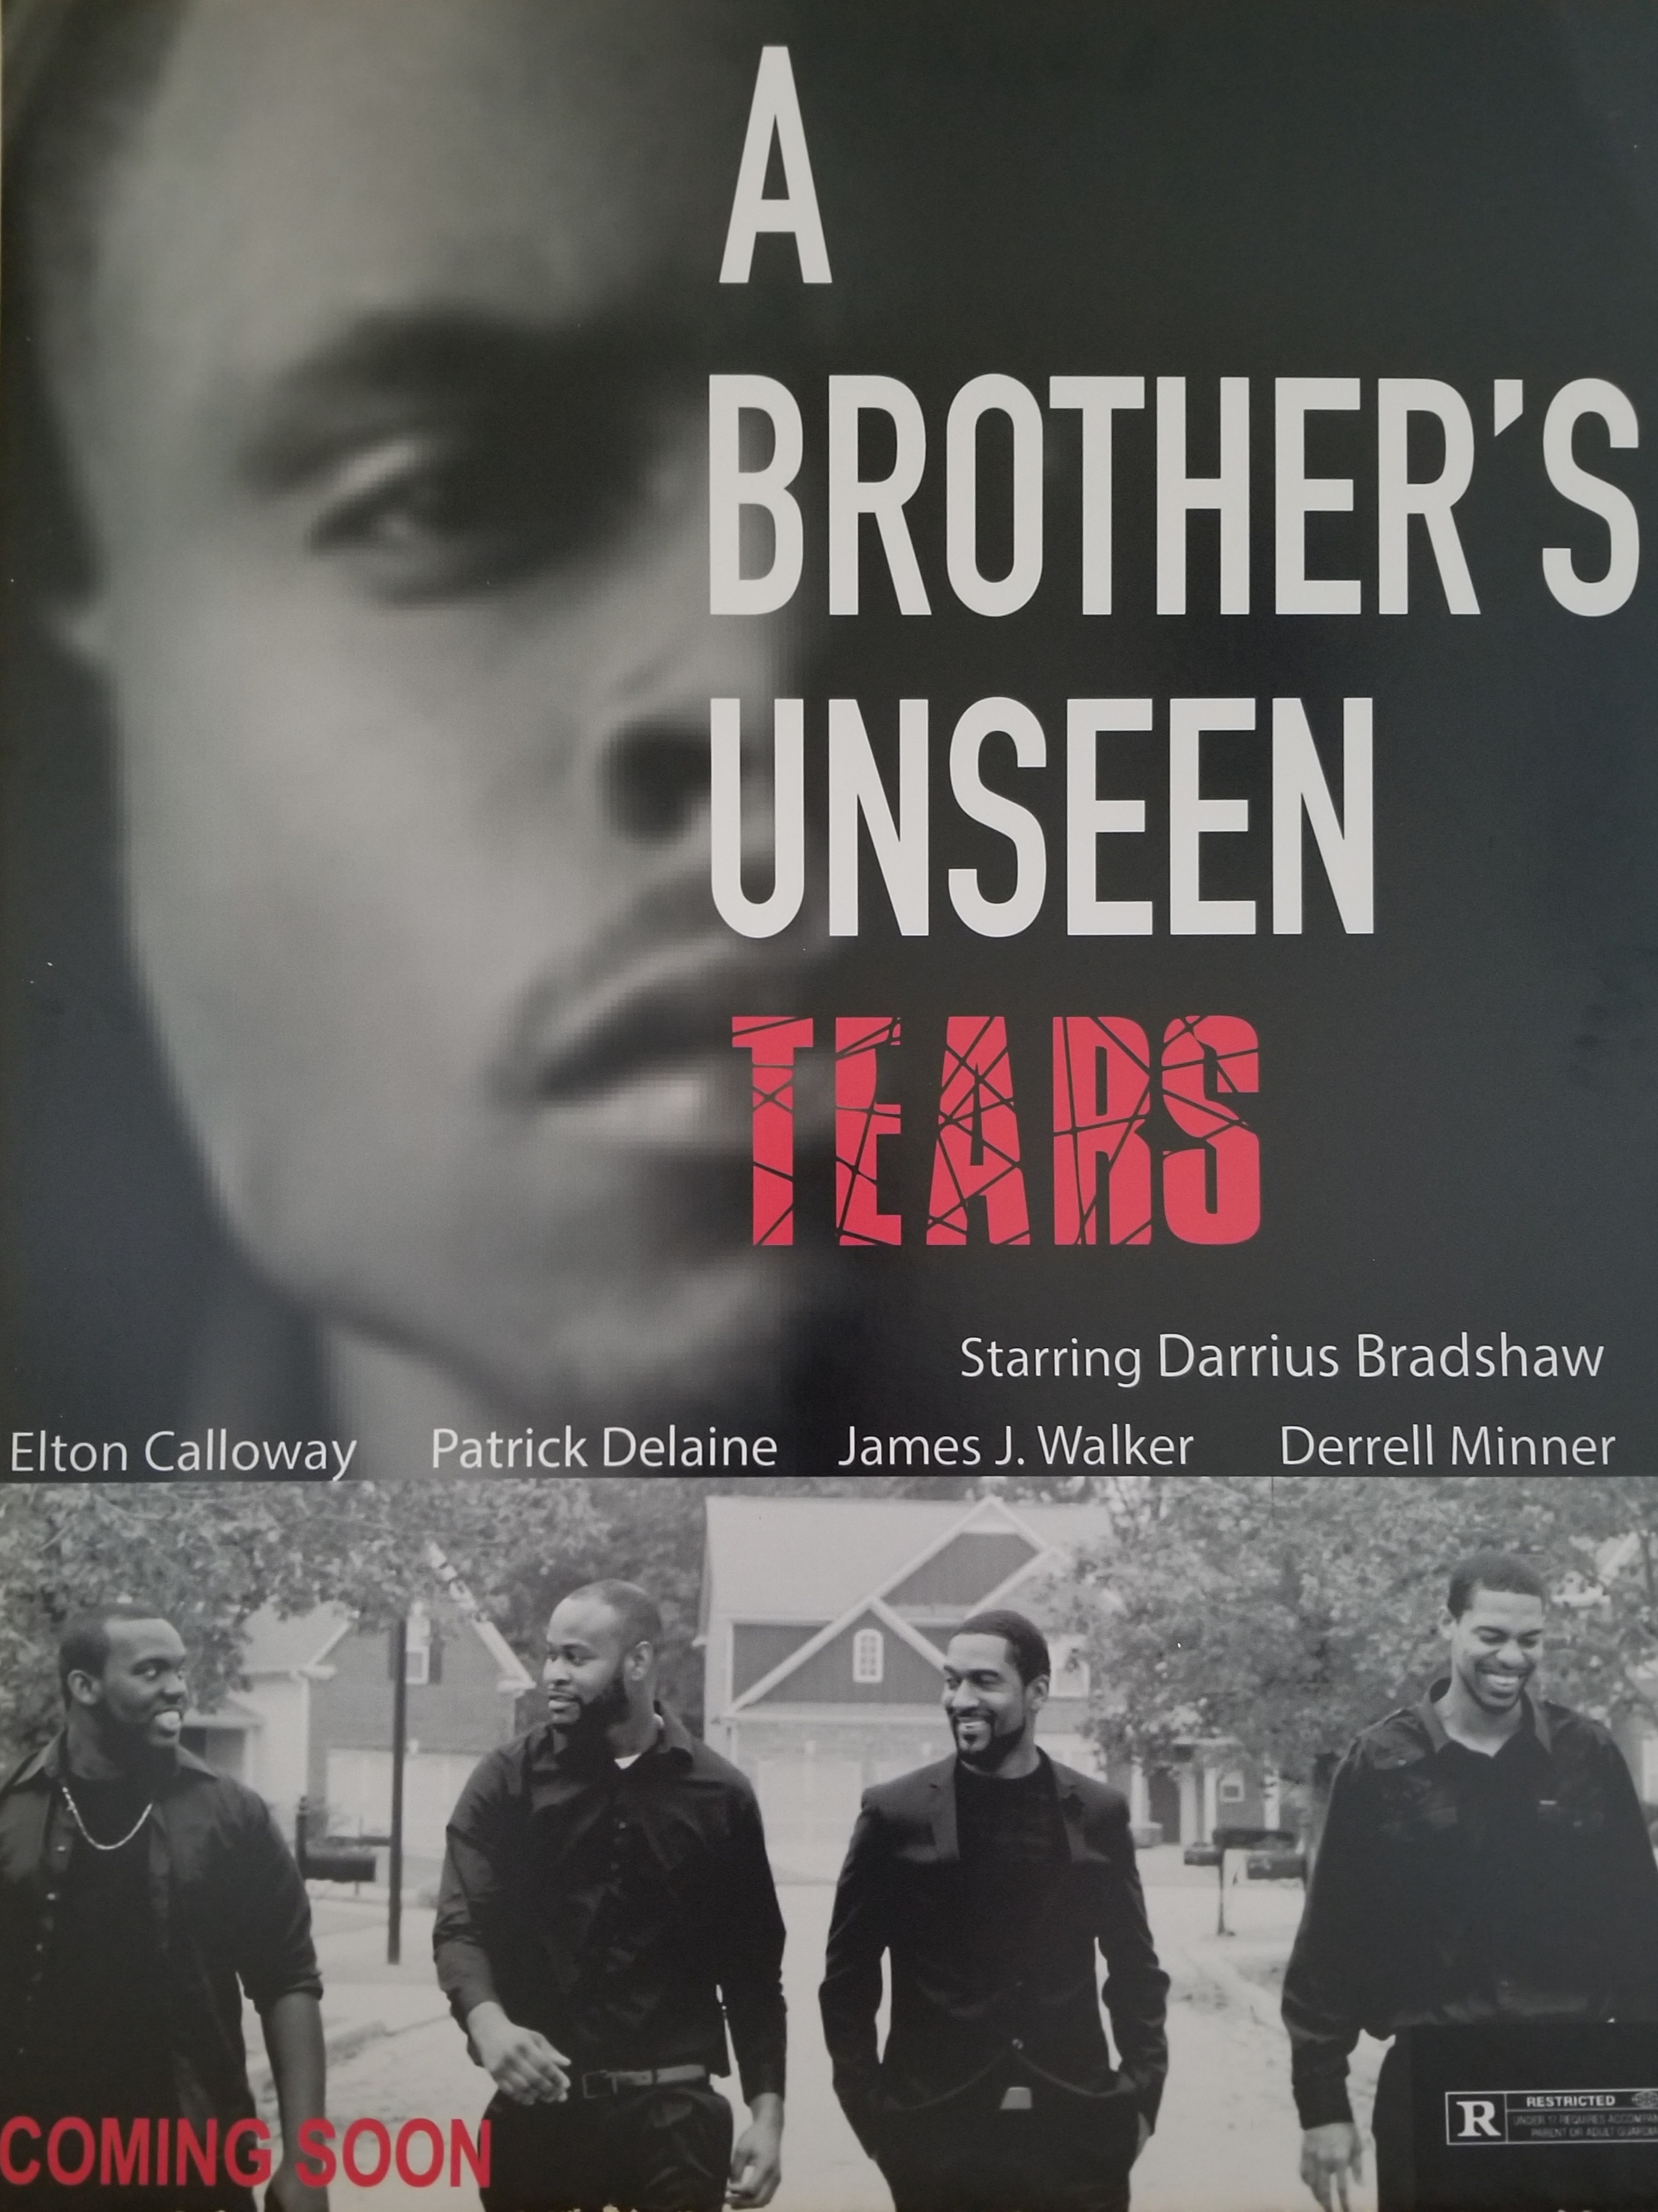 A Brother's Unseen Tears (2019)